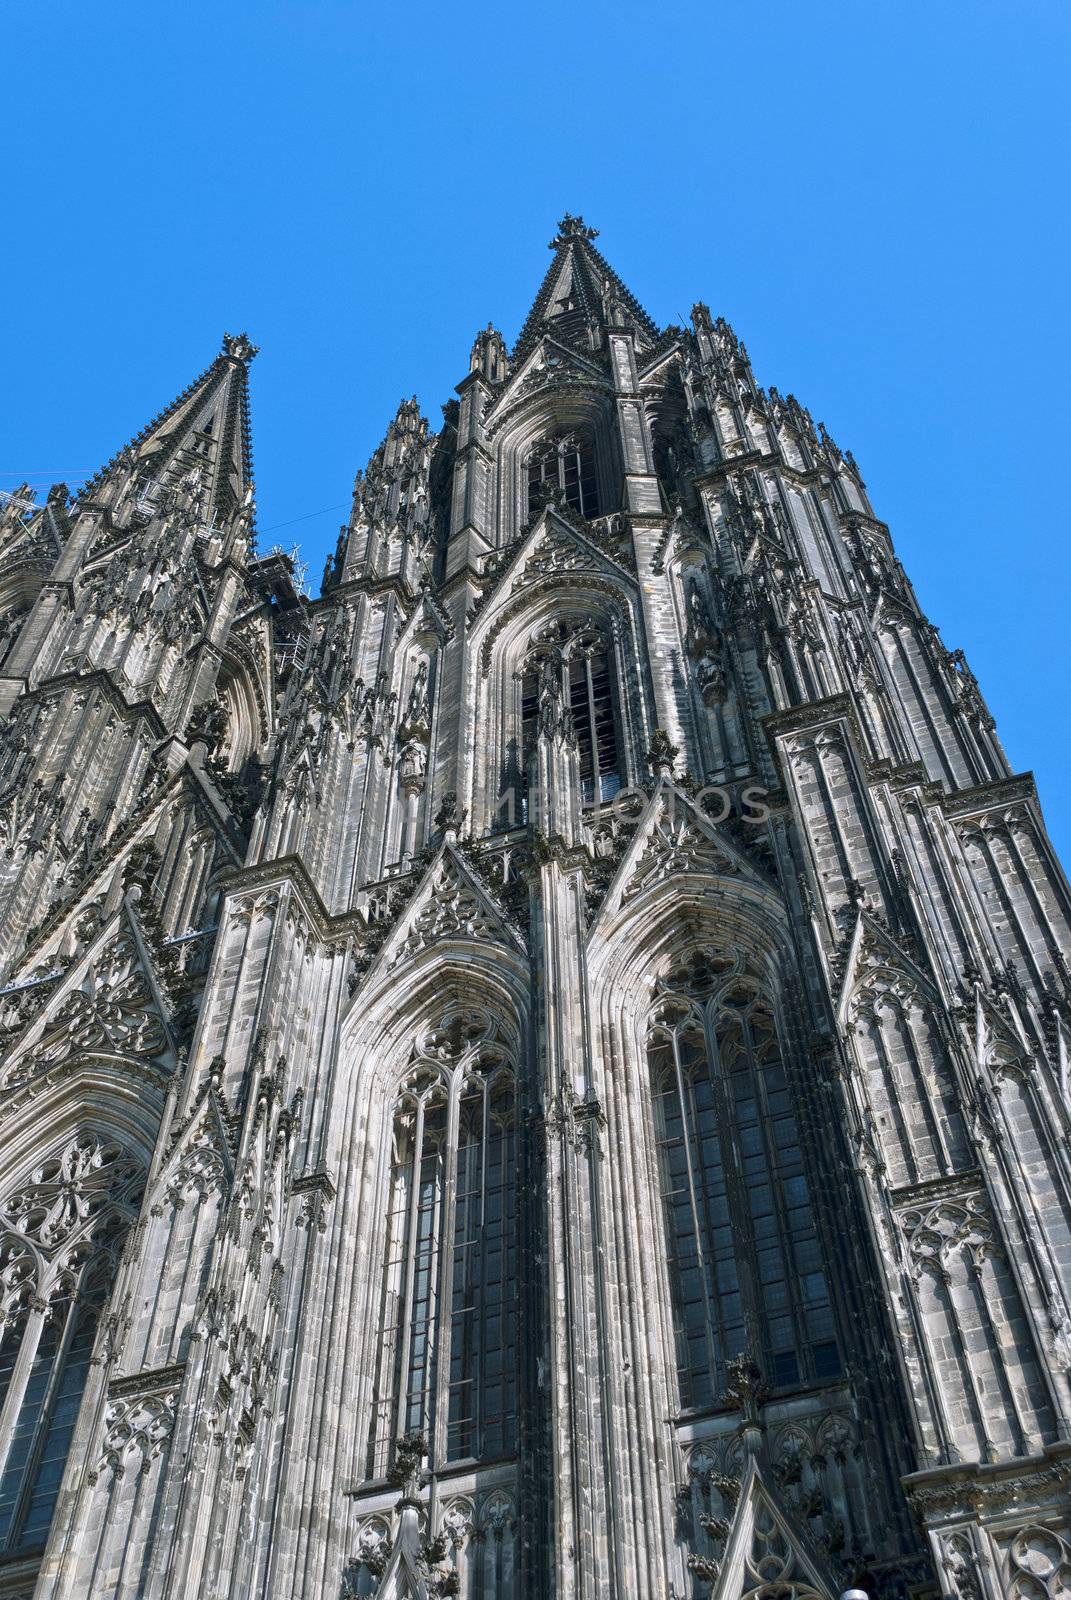 Cologne Cathedral (German: Koelner Dom, officially Hohe Domkirche St. Peter und Maria, English: High Cathedral of Sts. Peter and Mary), a Roman Catholic church in Cologne, Germany.